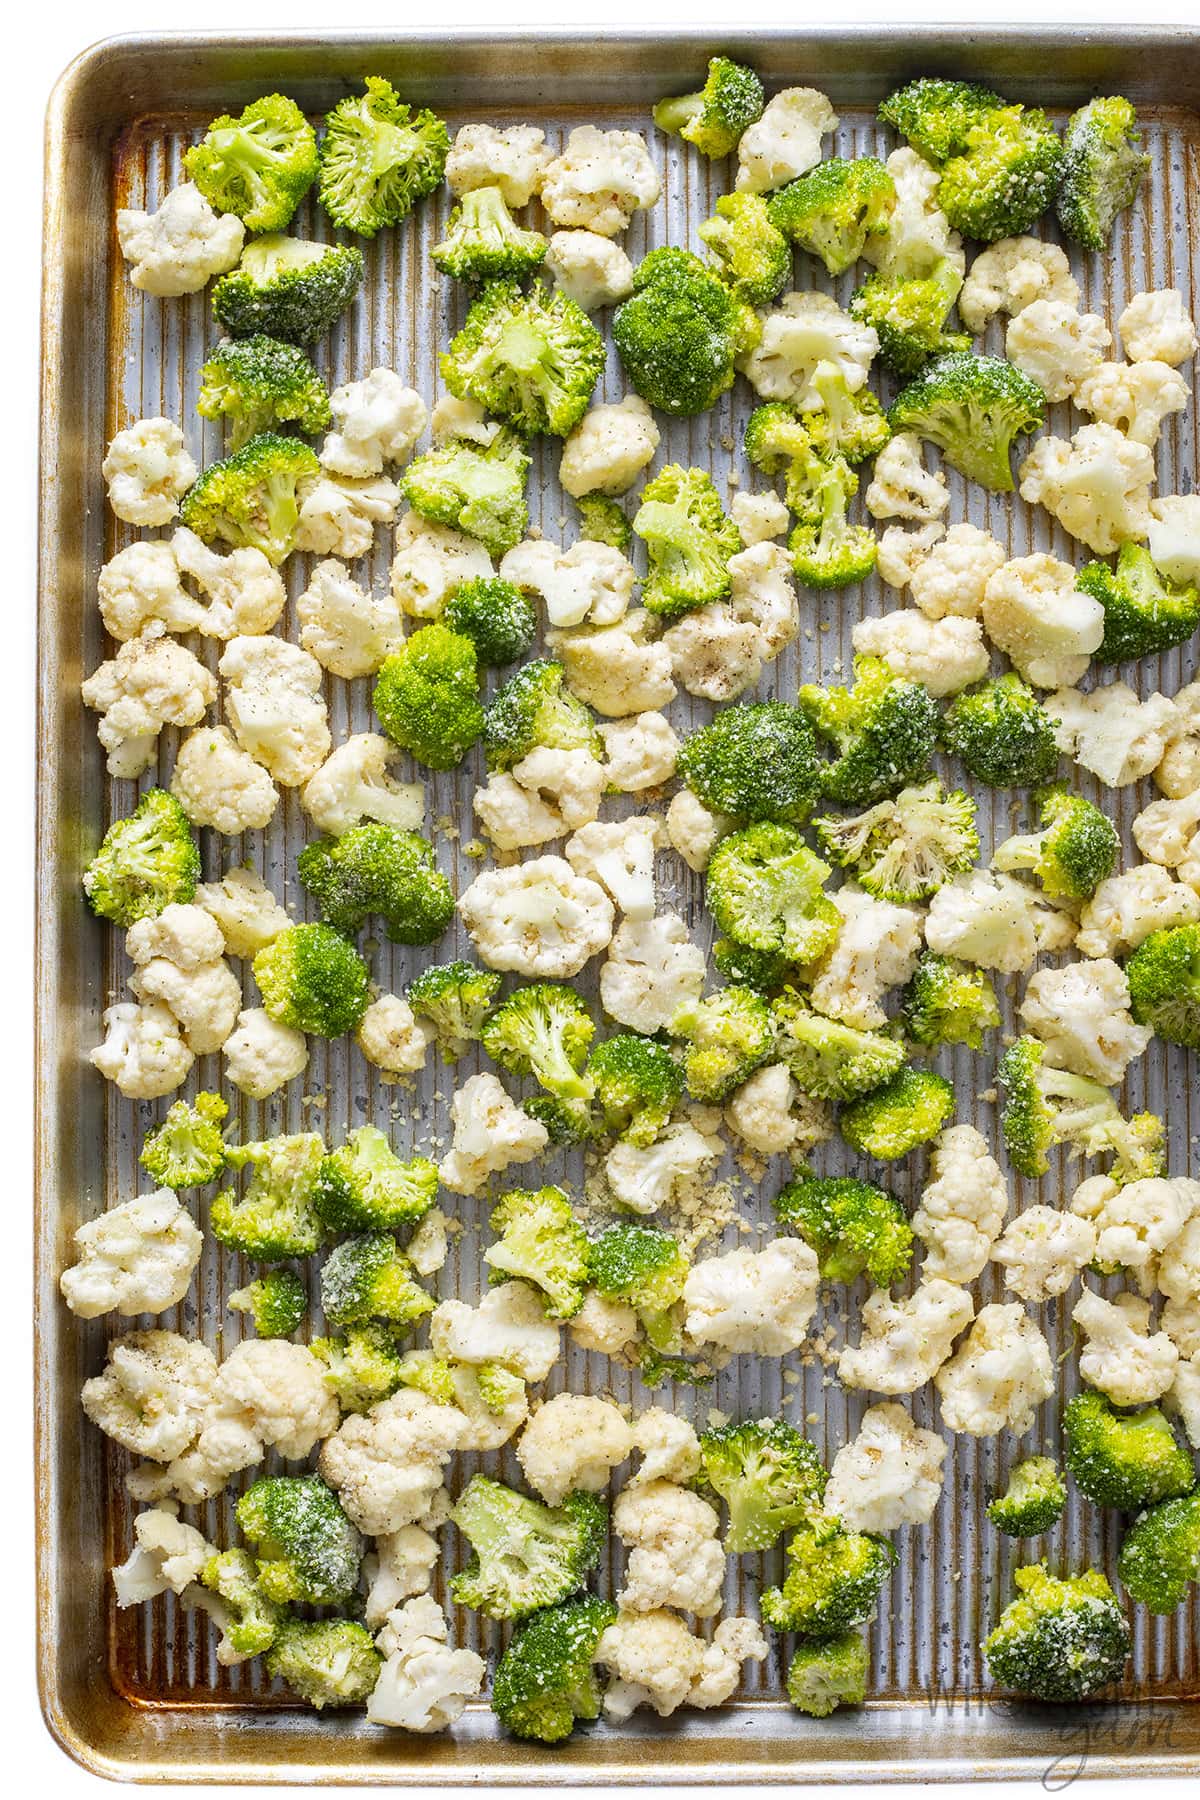 Raw cauliflower and broccoli spread out on a sheet pan.